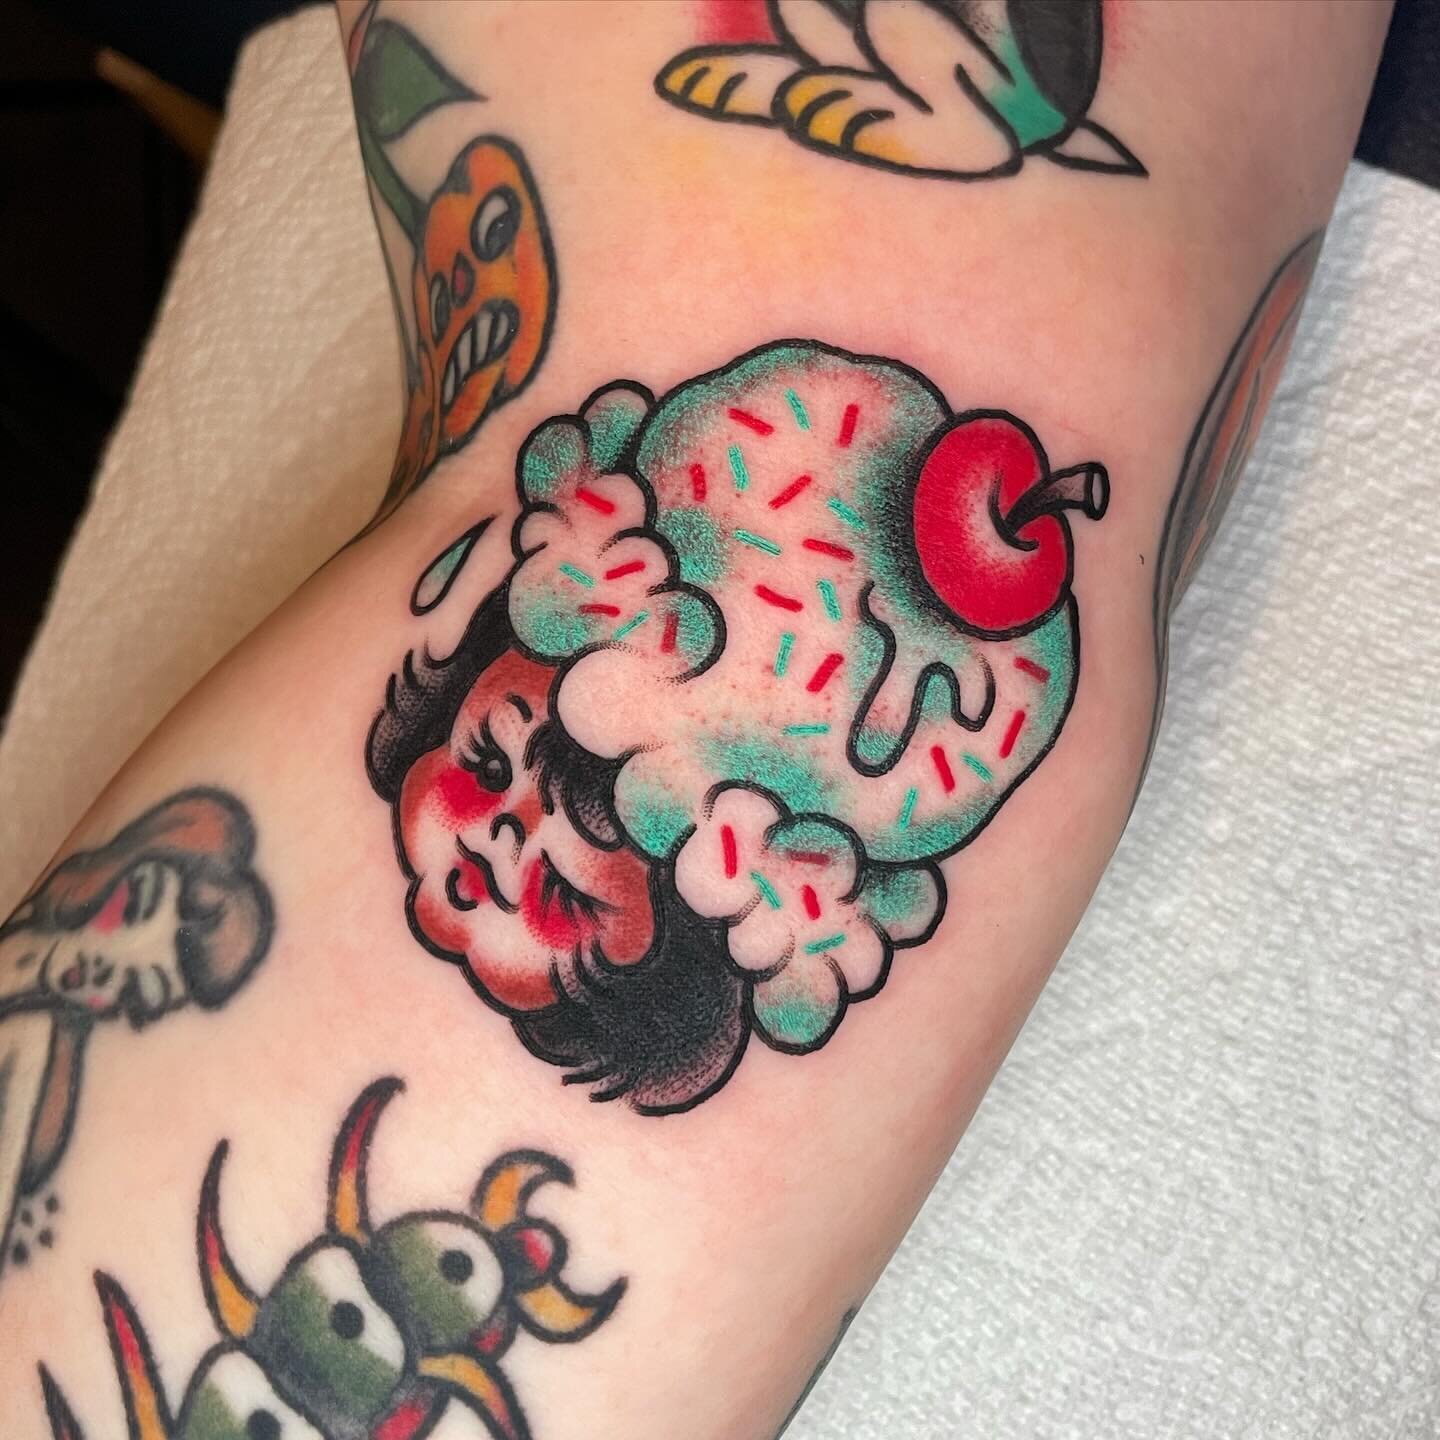 Never get sick of doing these cuties! 
.
.
.
#tattoo #tattoos #okc #oklahomacity #oklahoma #oklahomacitytattoo #oklahomacitytattooartist  #oklahomatattooartist #oklahomatattoo #americantraditionaltattoo #americantraditionaltattooflash #traditionalart